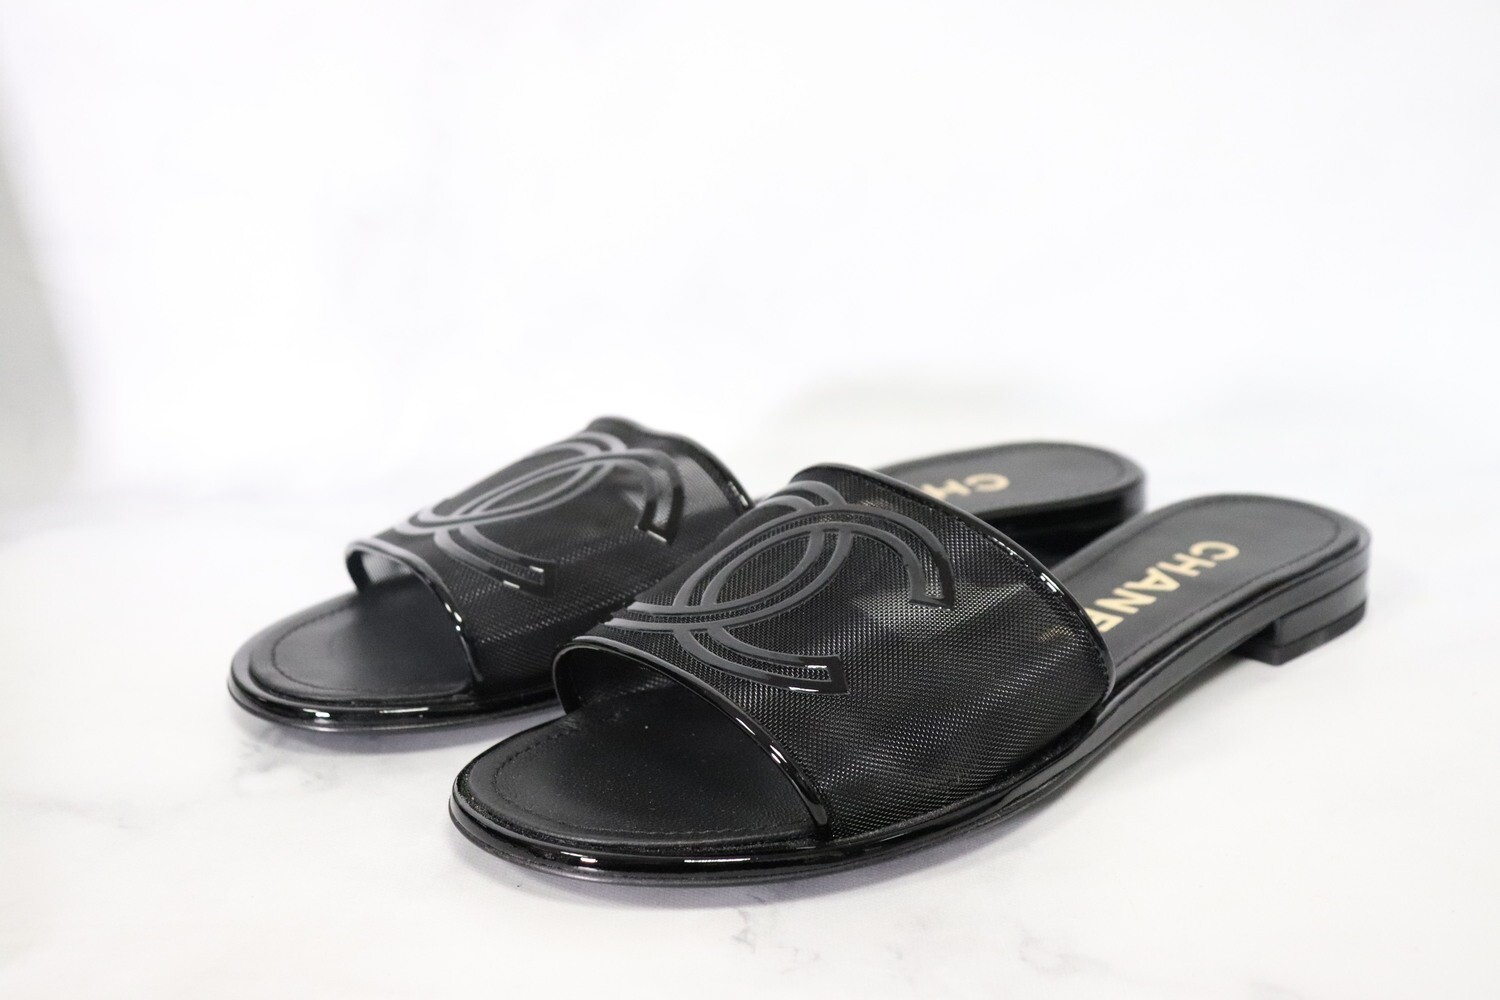 Chanel Shoes Sandals Slides Black, Preowned in Box, Size 36